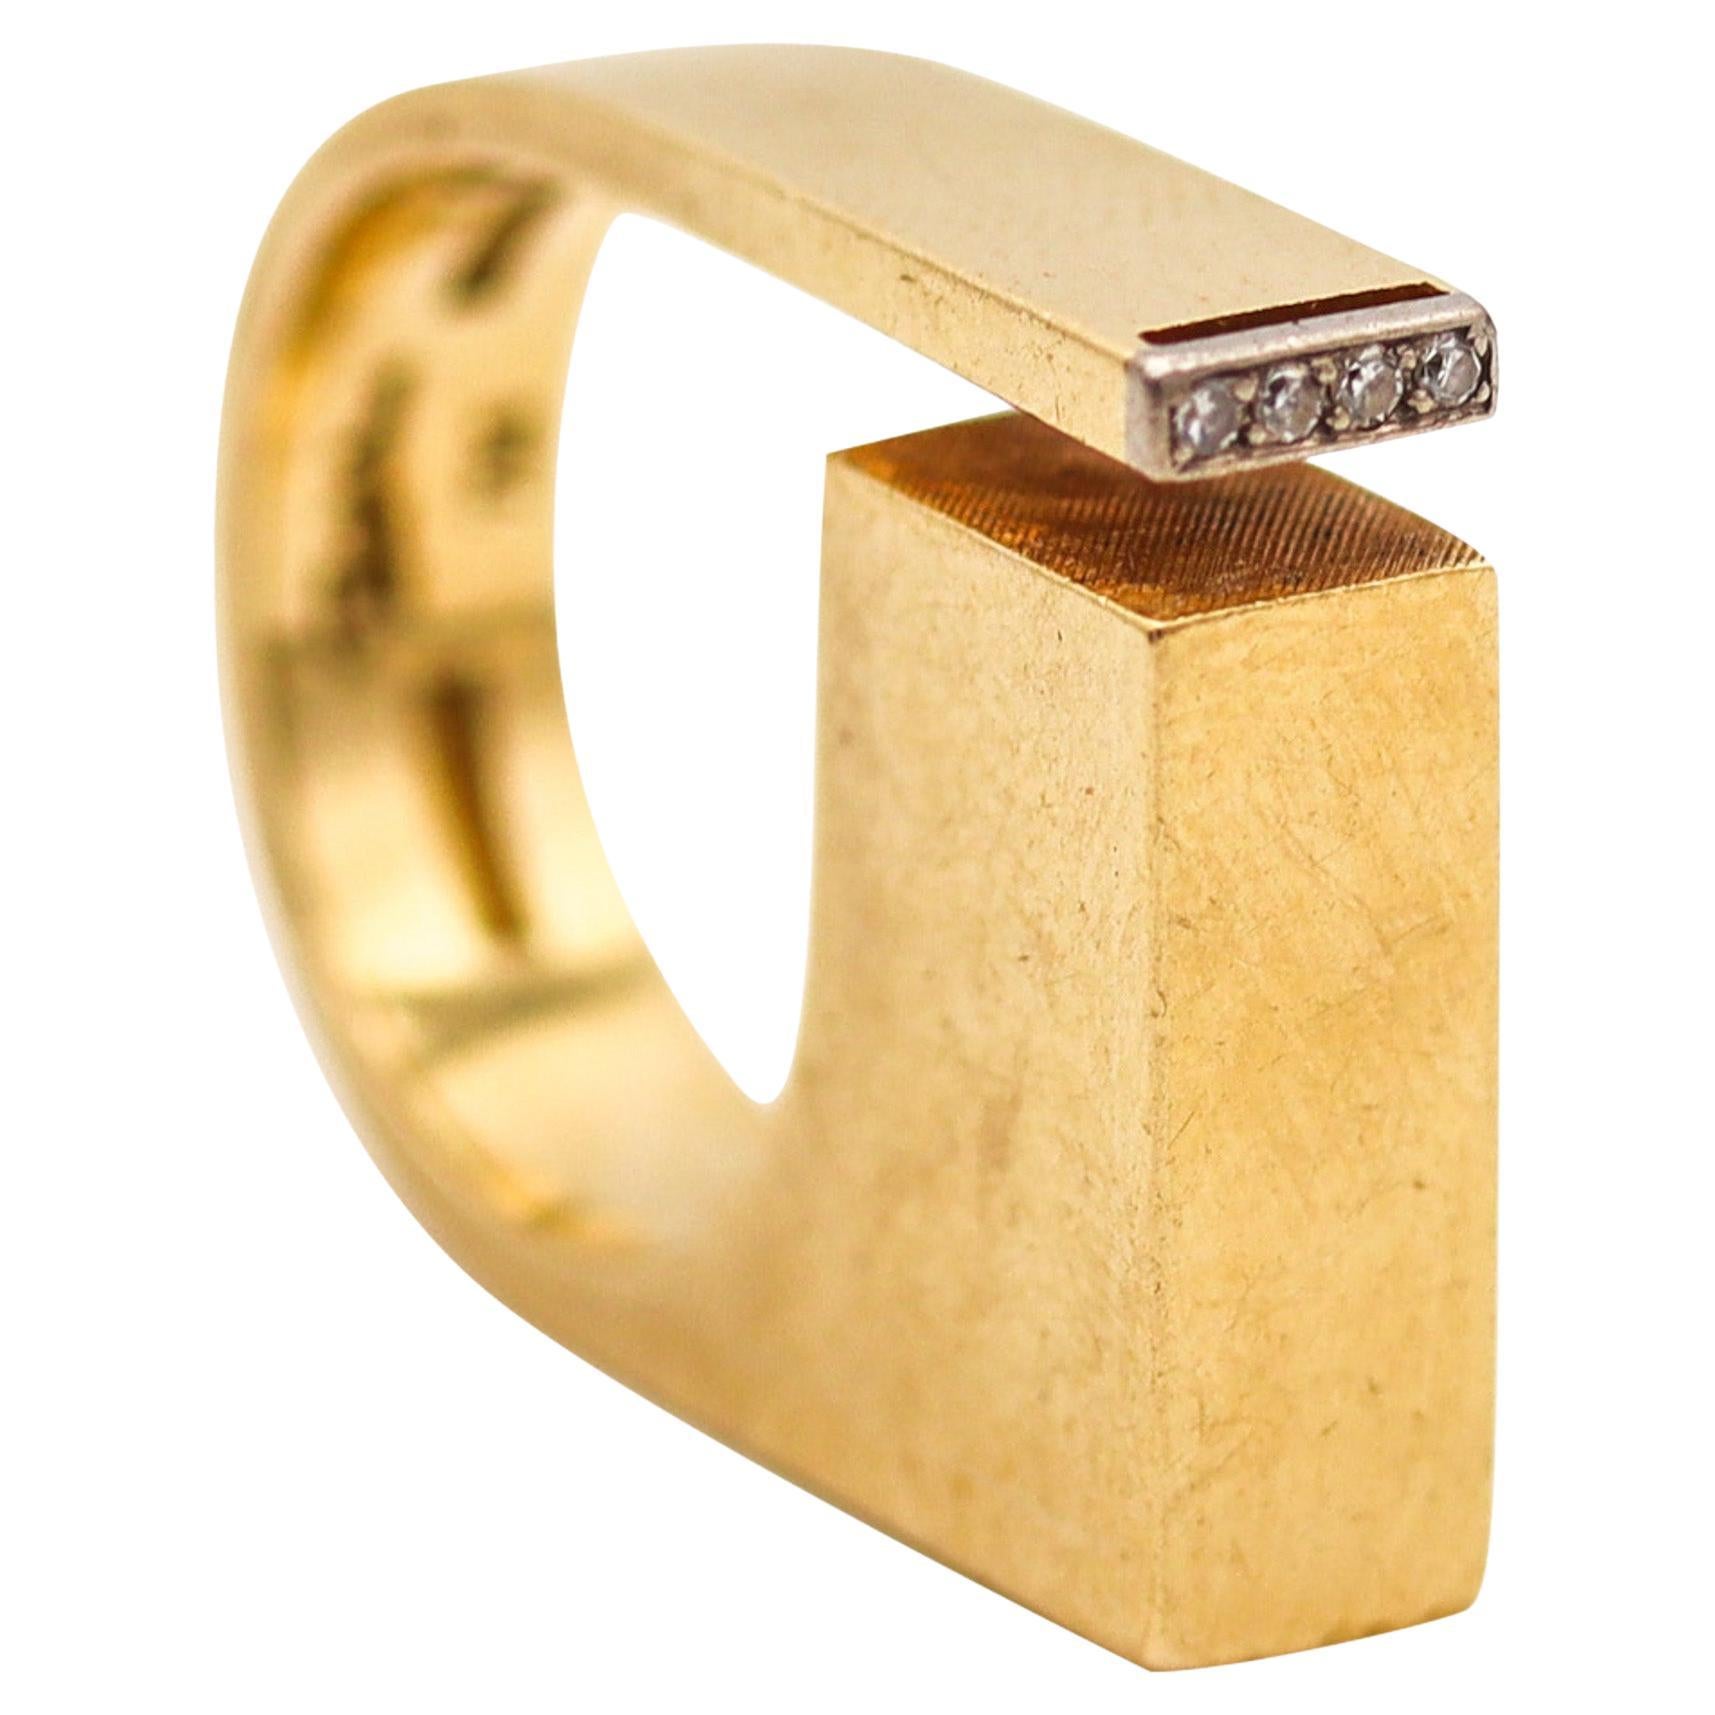 Rey Urban 1970 Denmark Geometric Sculptural Ring in Solid 18K Gold And Diamonds For Sale